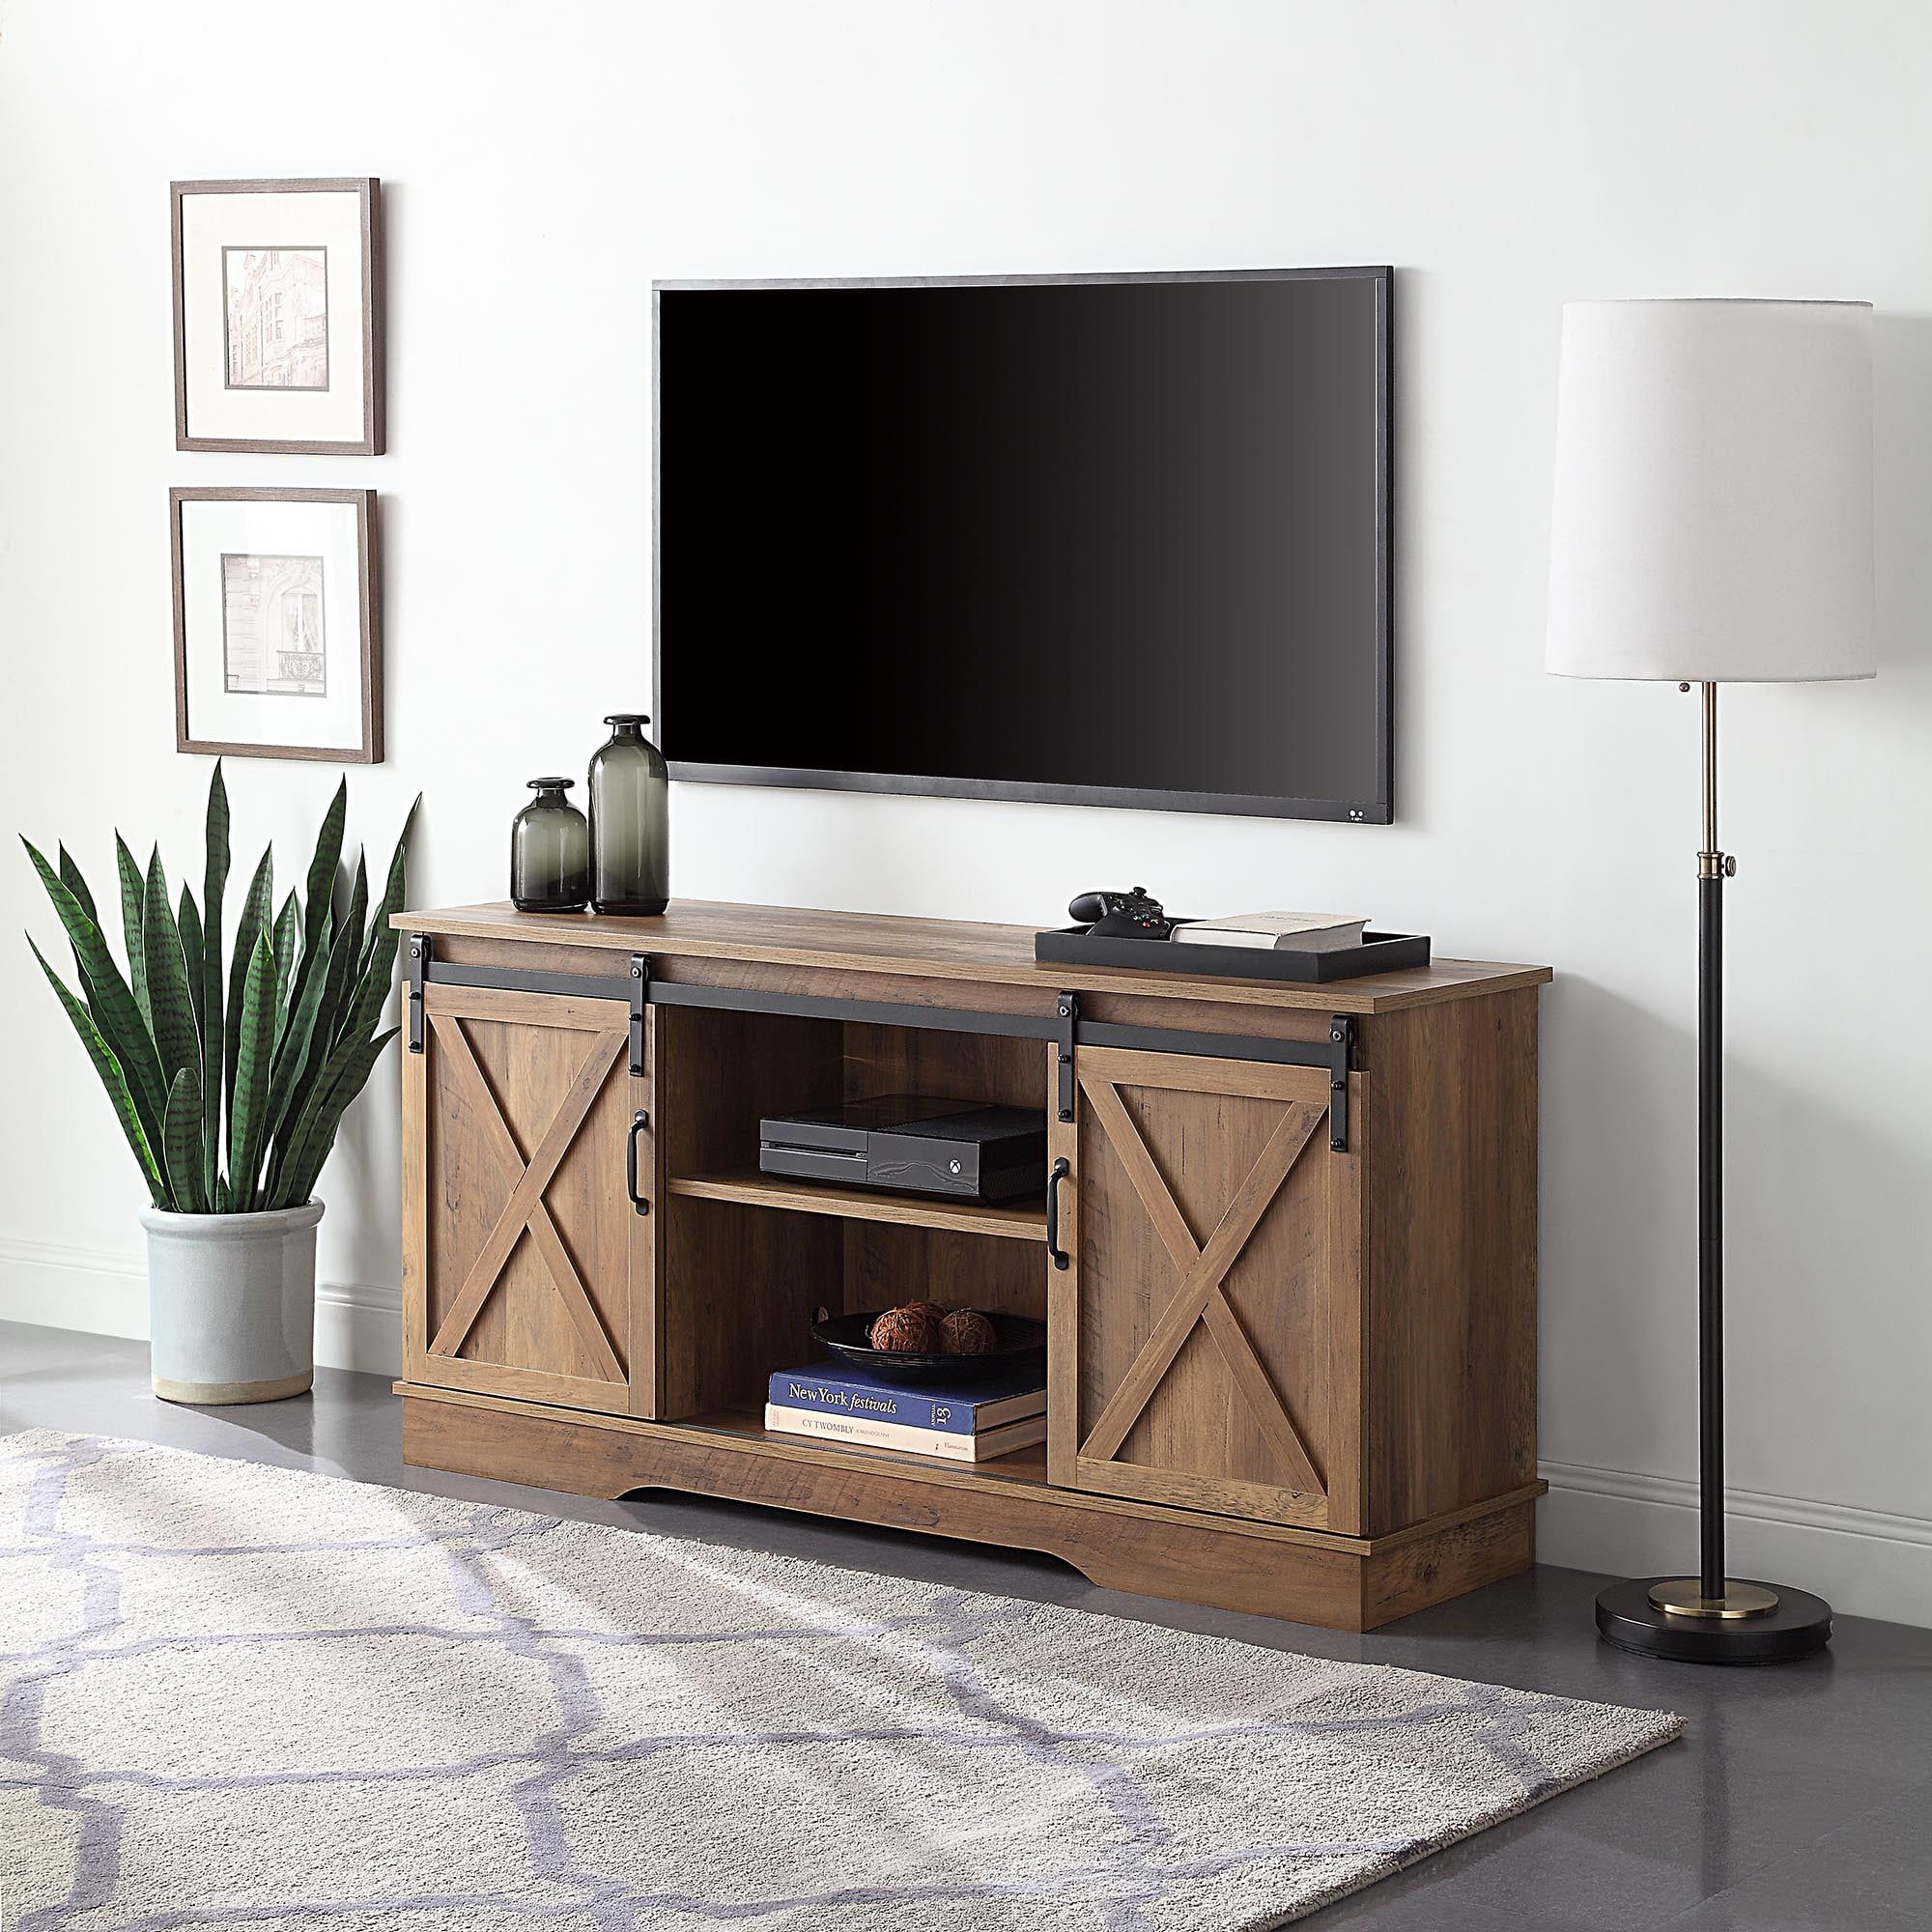 Belleze Modern Farmhouse Style 58 Inch Tv Stand With Sliding Barn Door Inside Farmhouse Tv Stands (View 18 of 20)